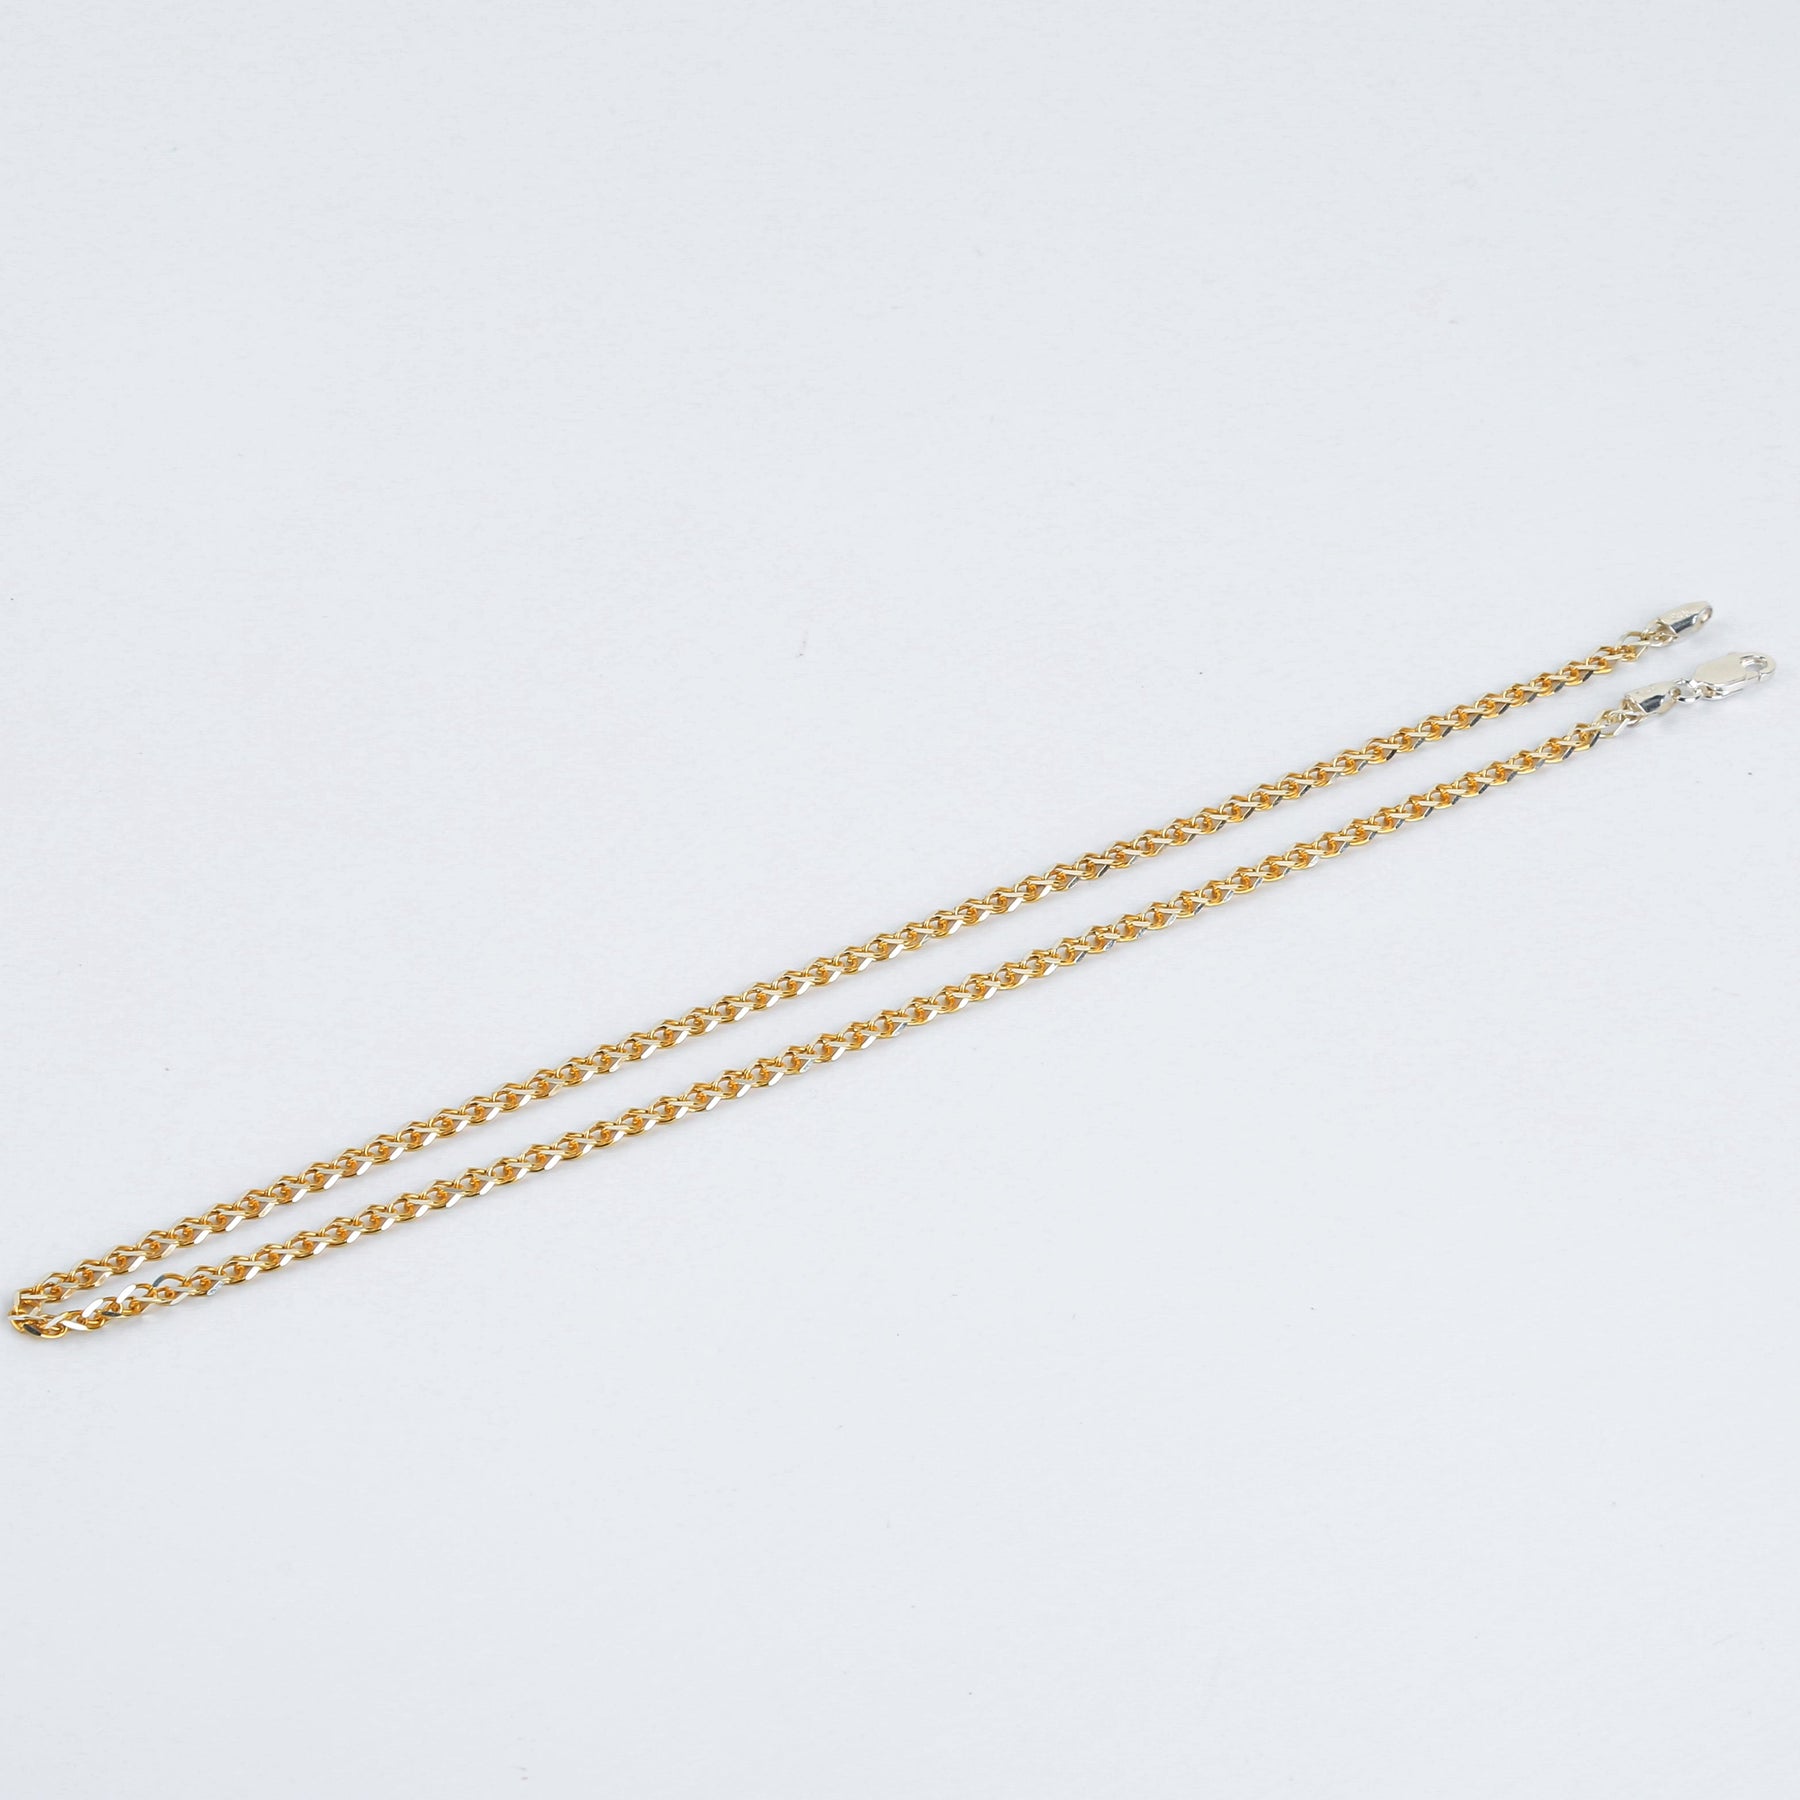 Golden 3.5mm Wheat Chain (18 Inches)